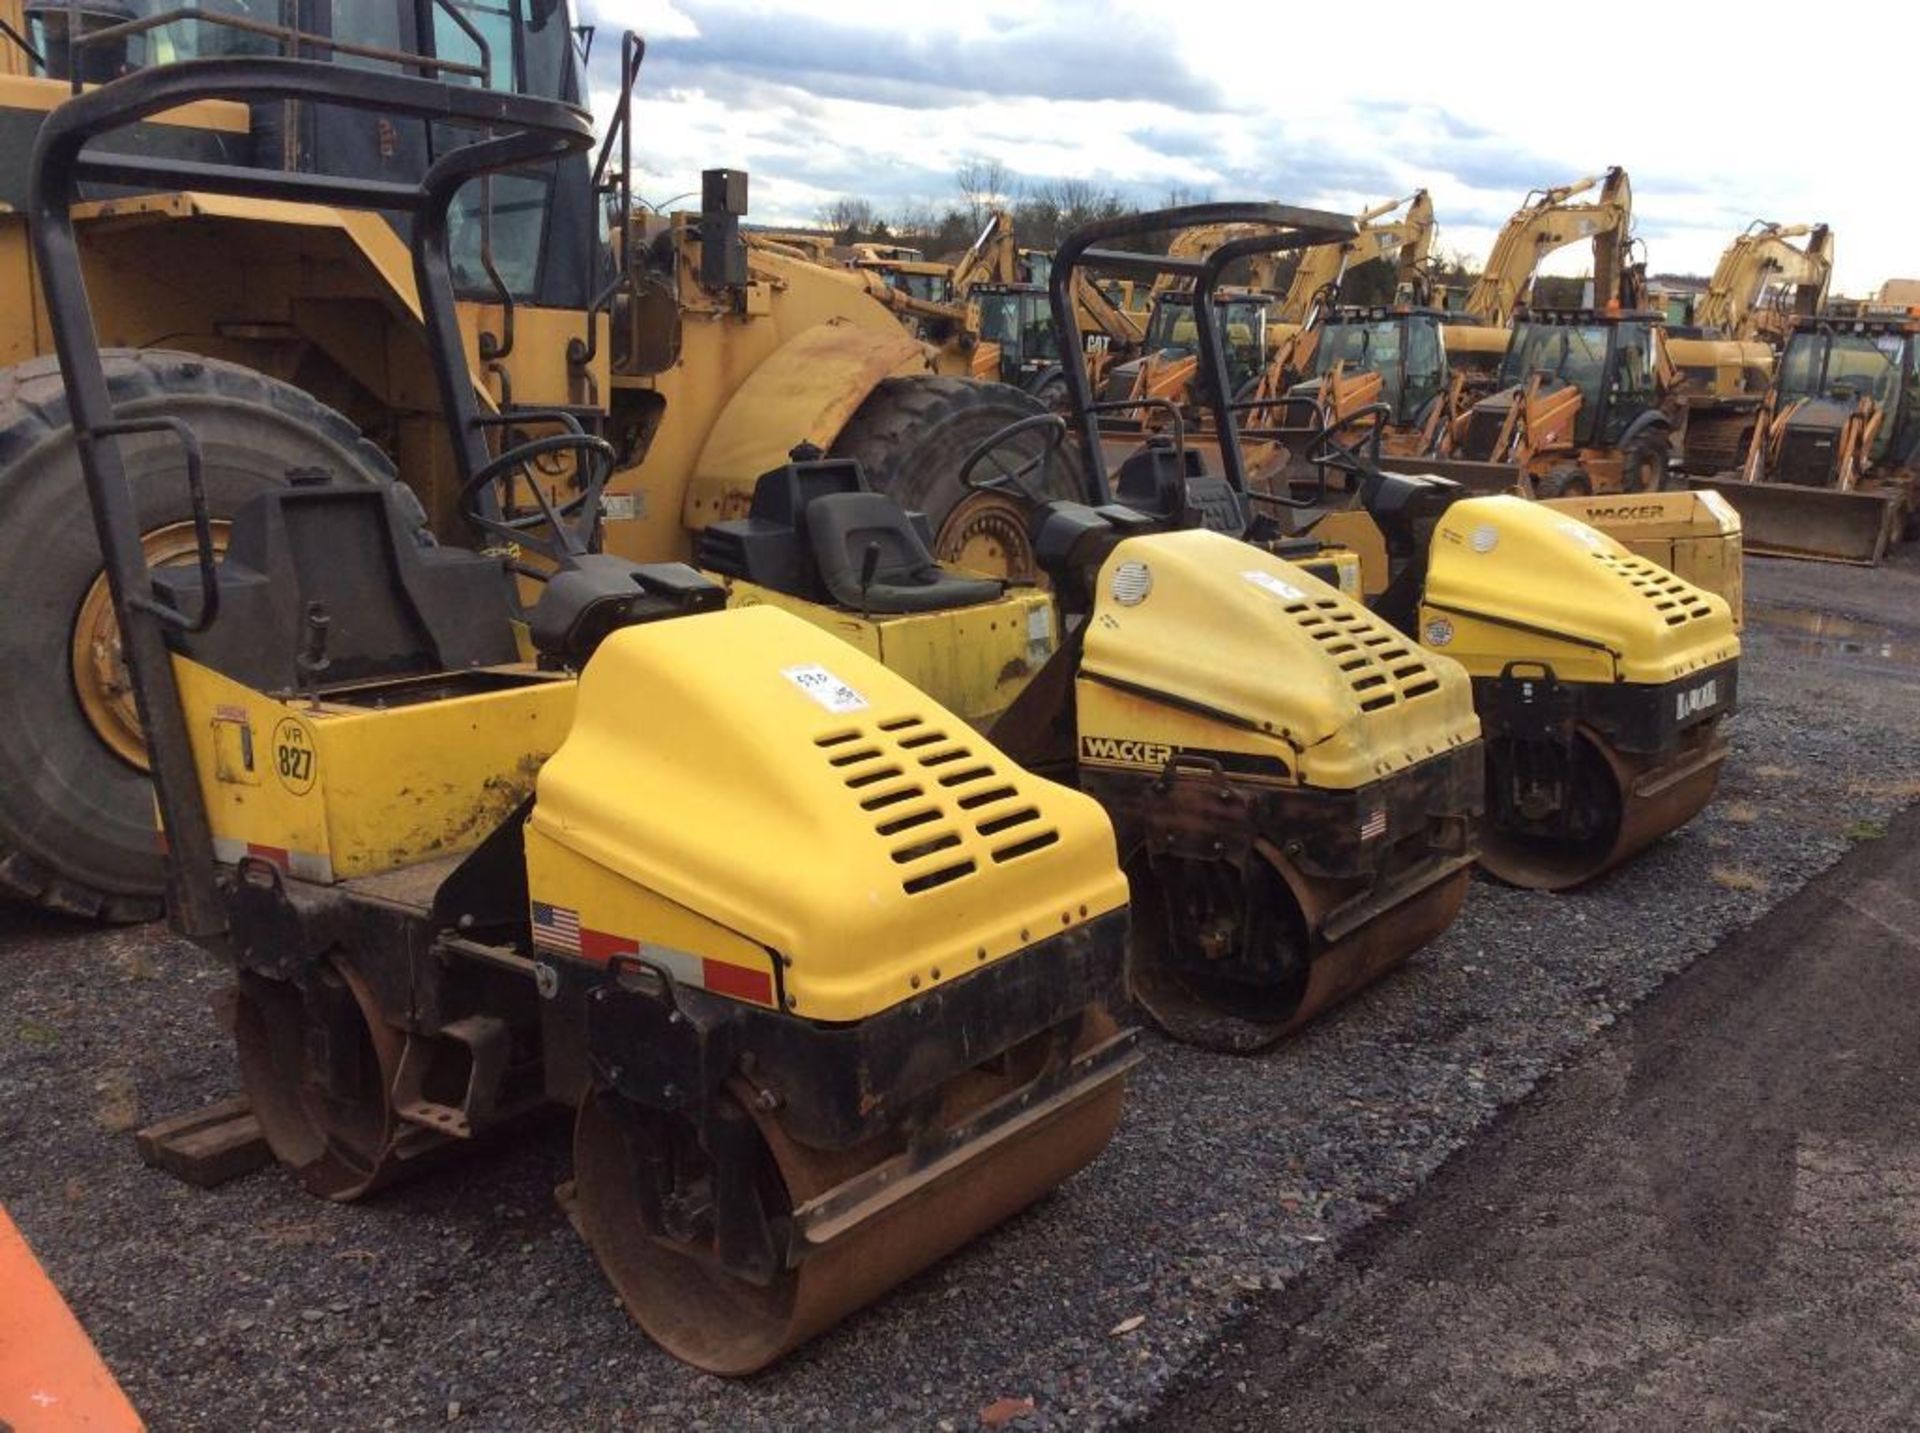 Lot of (4) asst rollers including (3) Wacker RD11A rollers and (1) Wacker trench roller (PARTS ONLY - Image 2 of 3